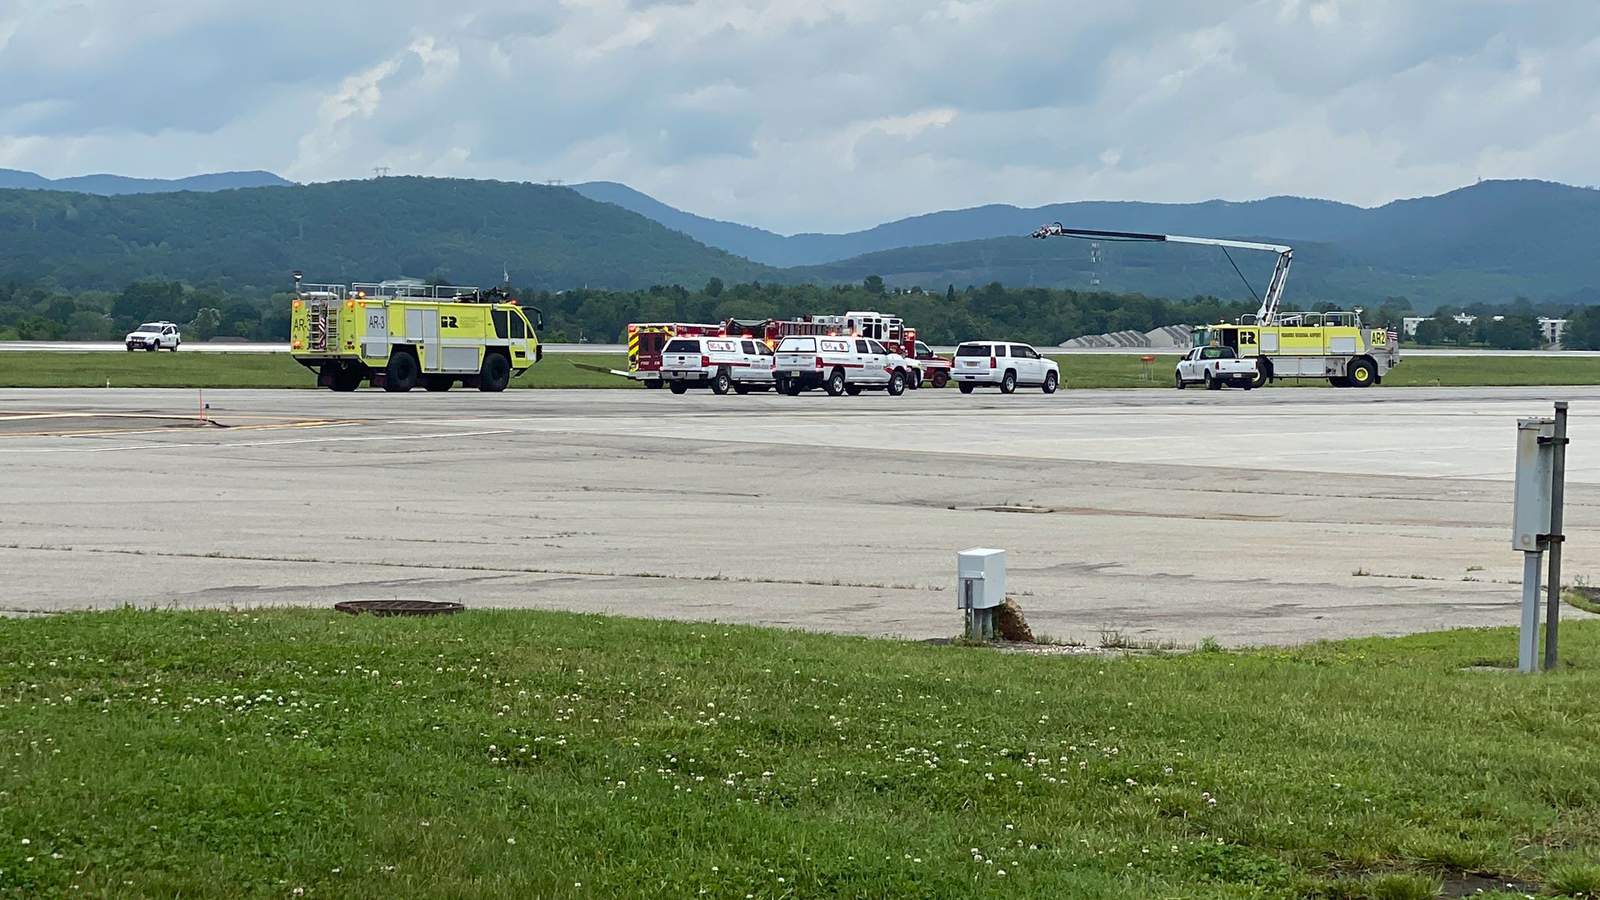 One hospitalized after small plane’s hard landing at Roanoke airport